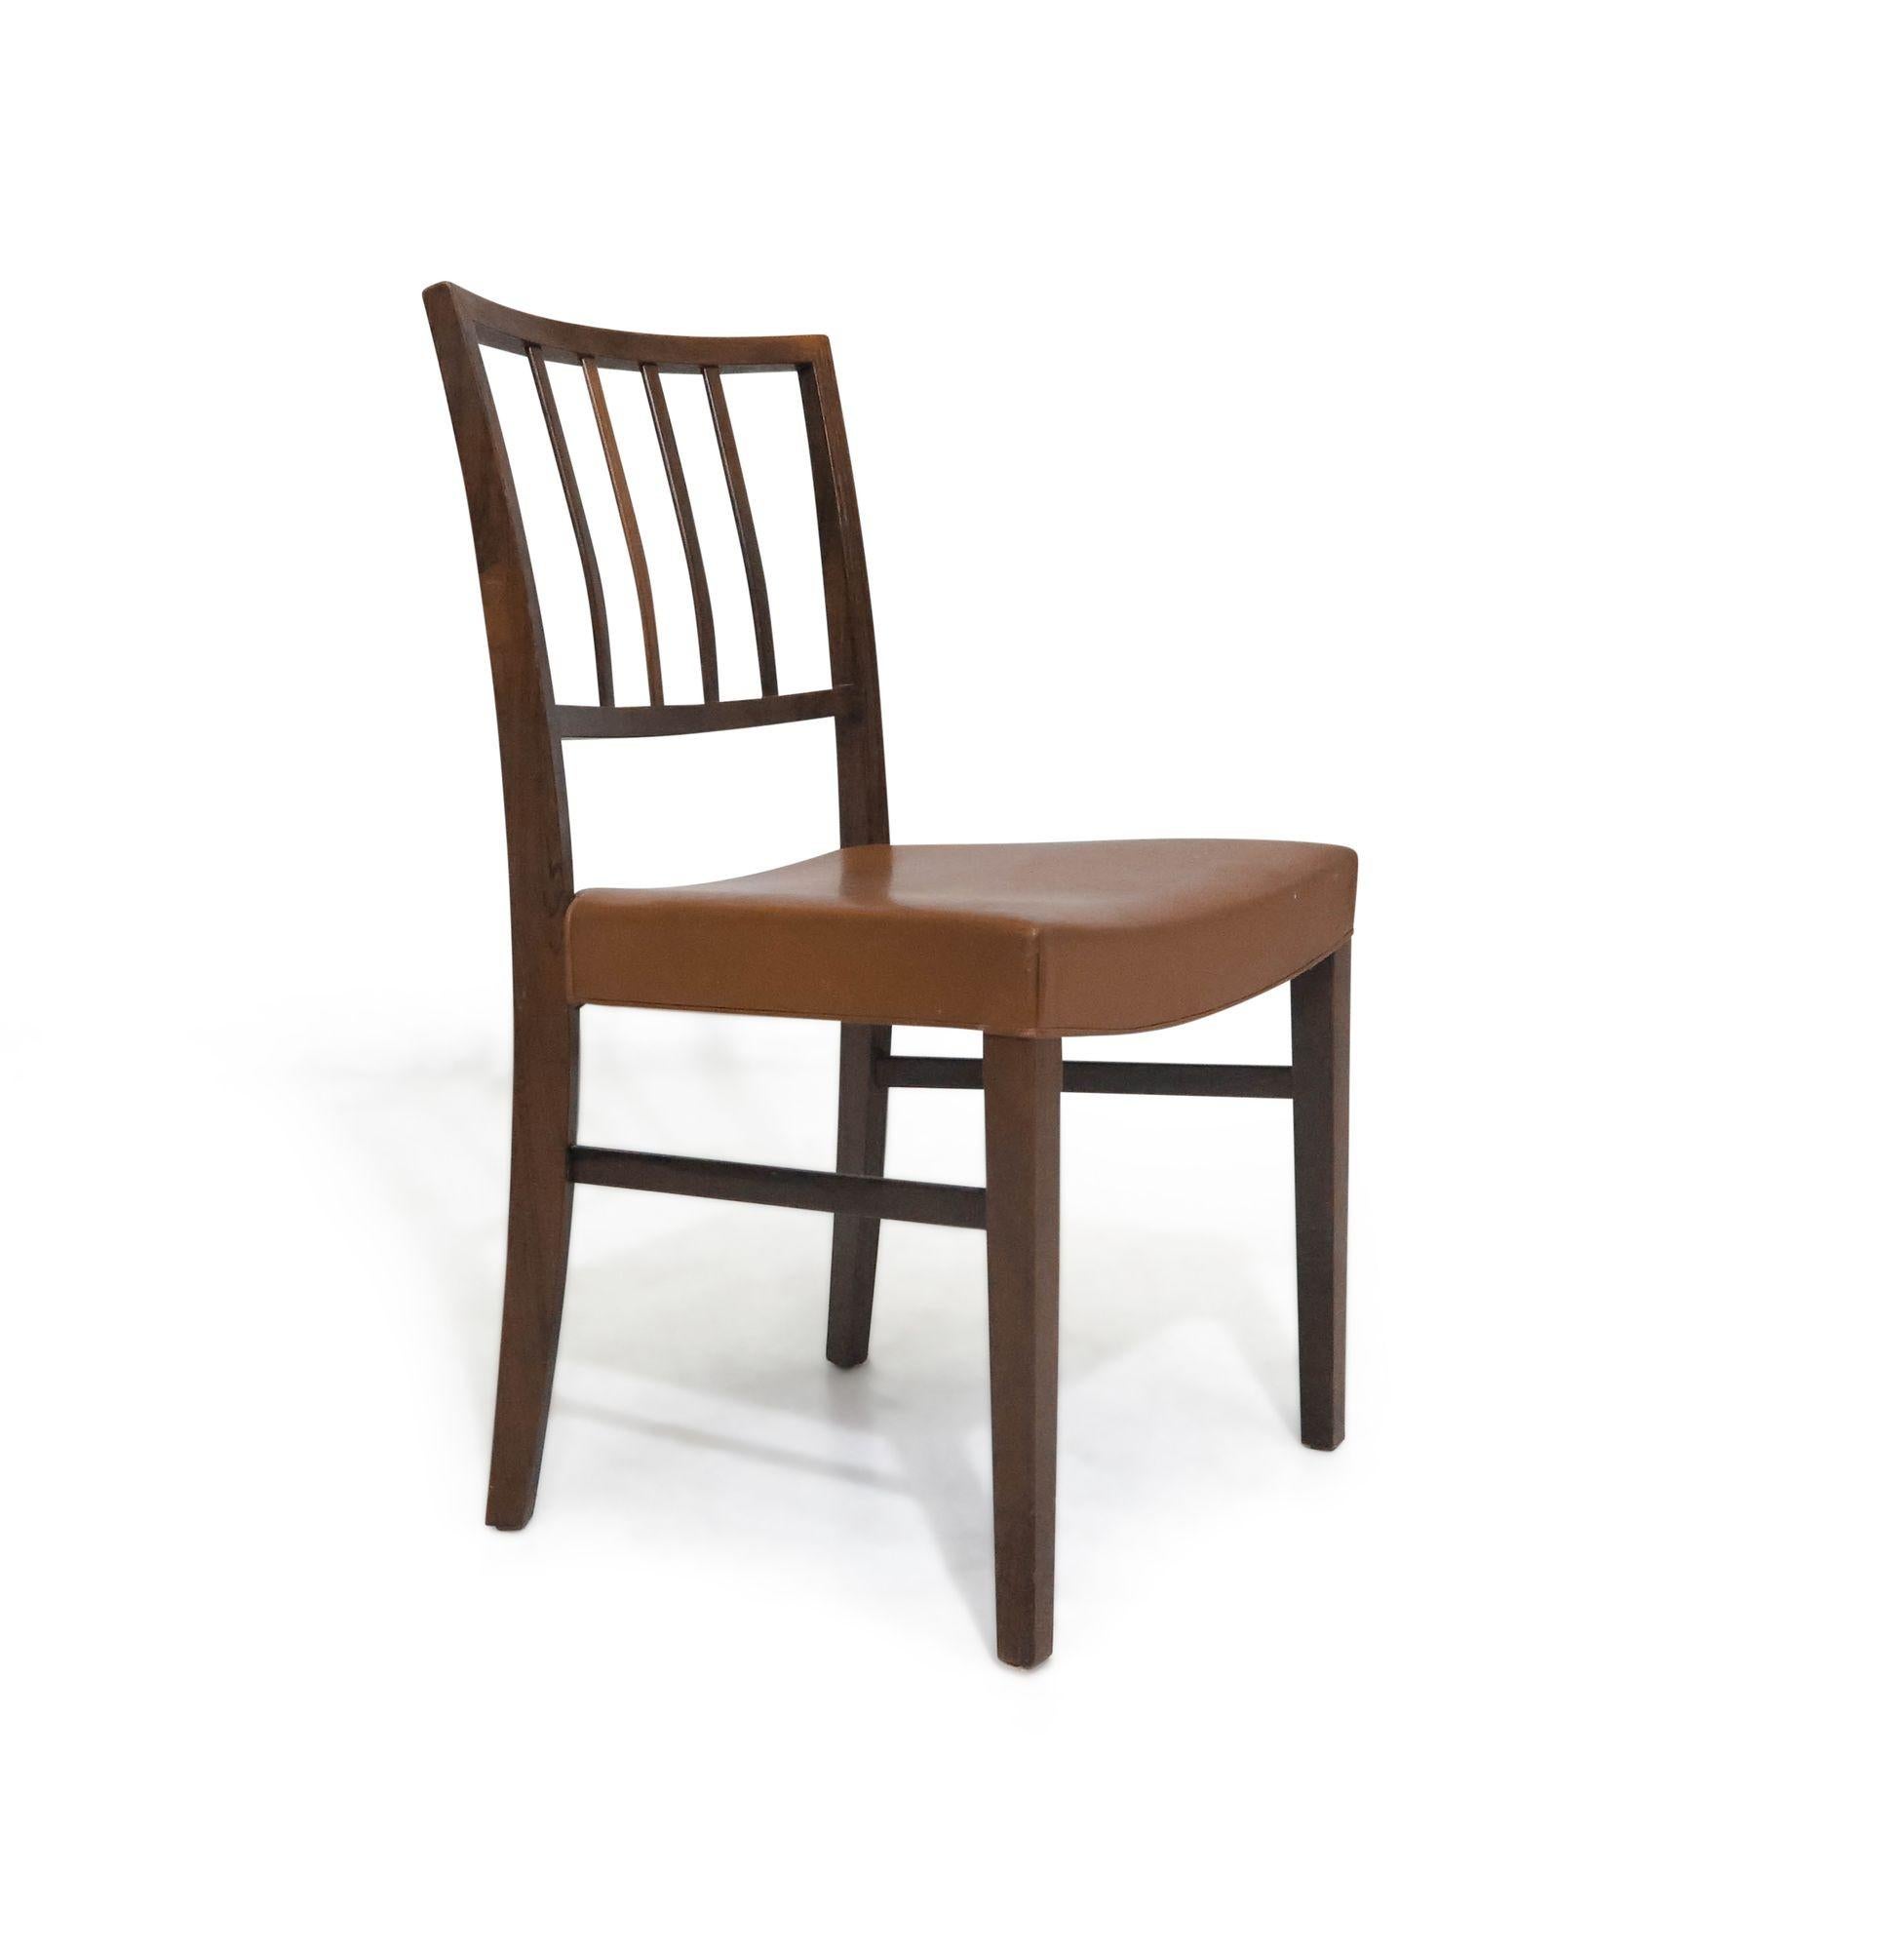 Scandinavian Modern 1950s Danish Rosewood Dining Chairs in Manner of Jacob Kjaer For Sale